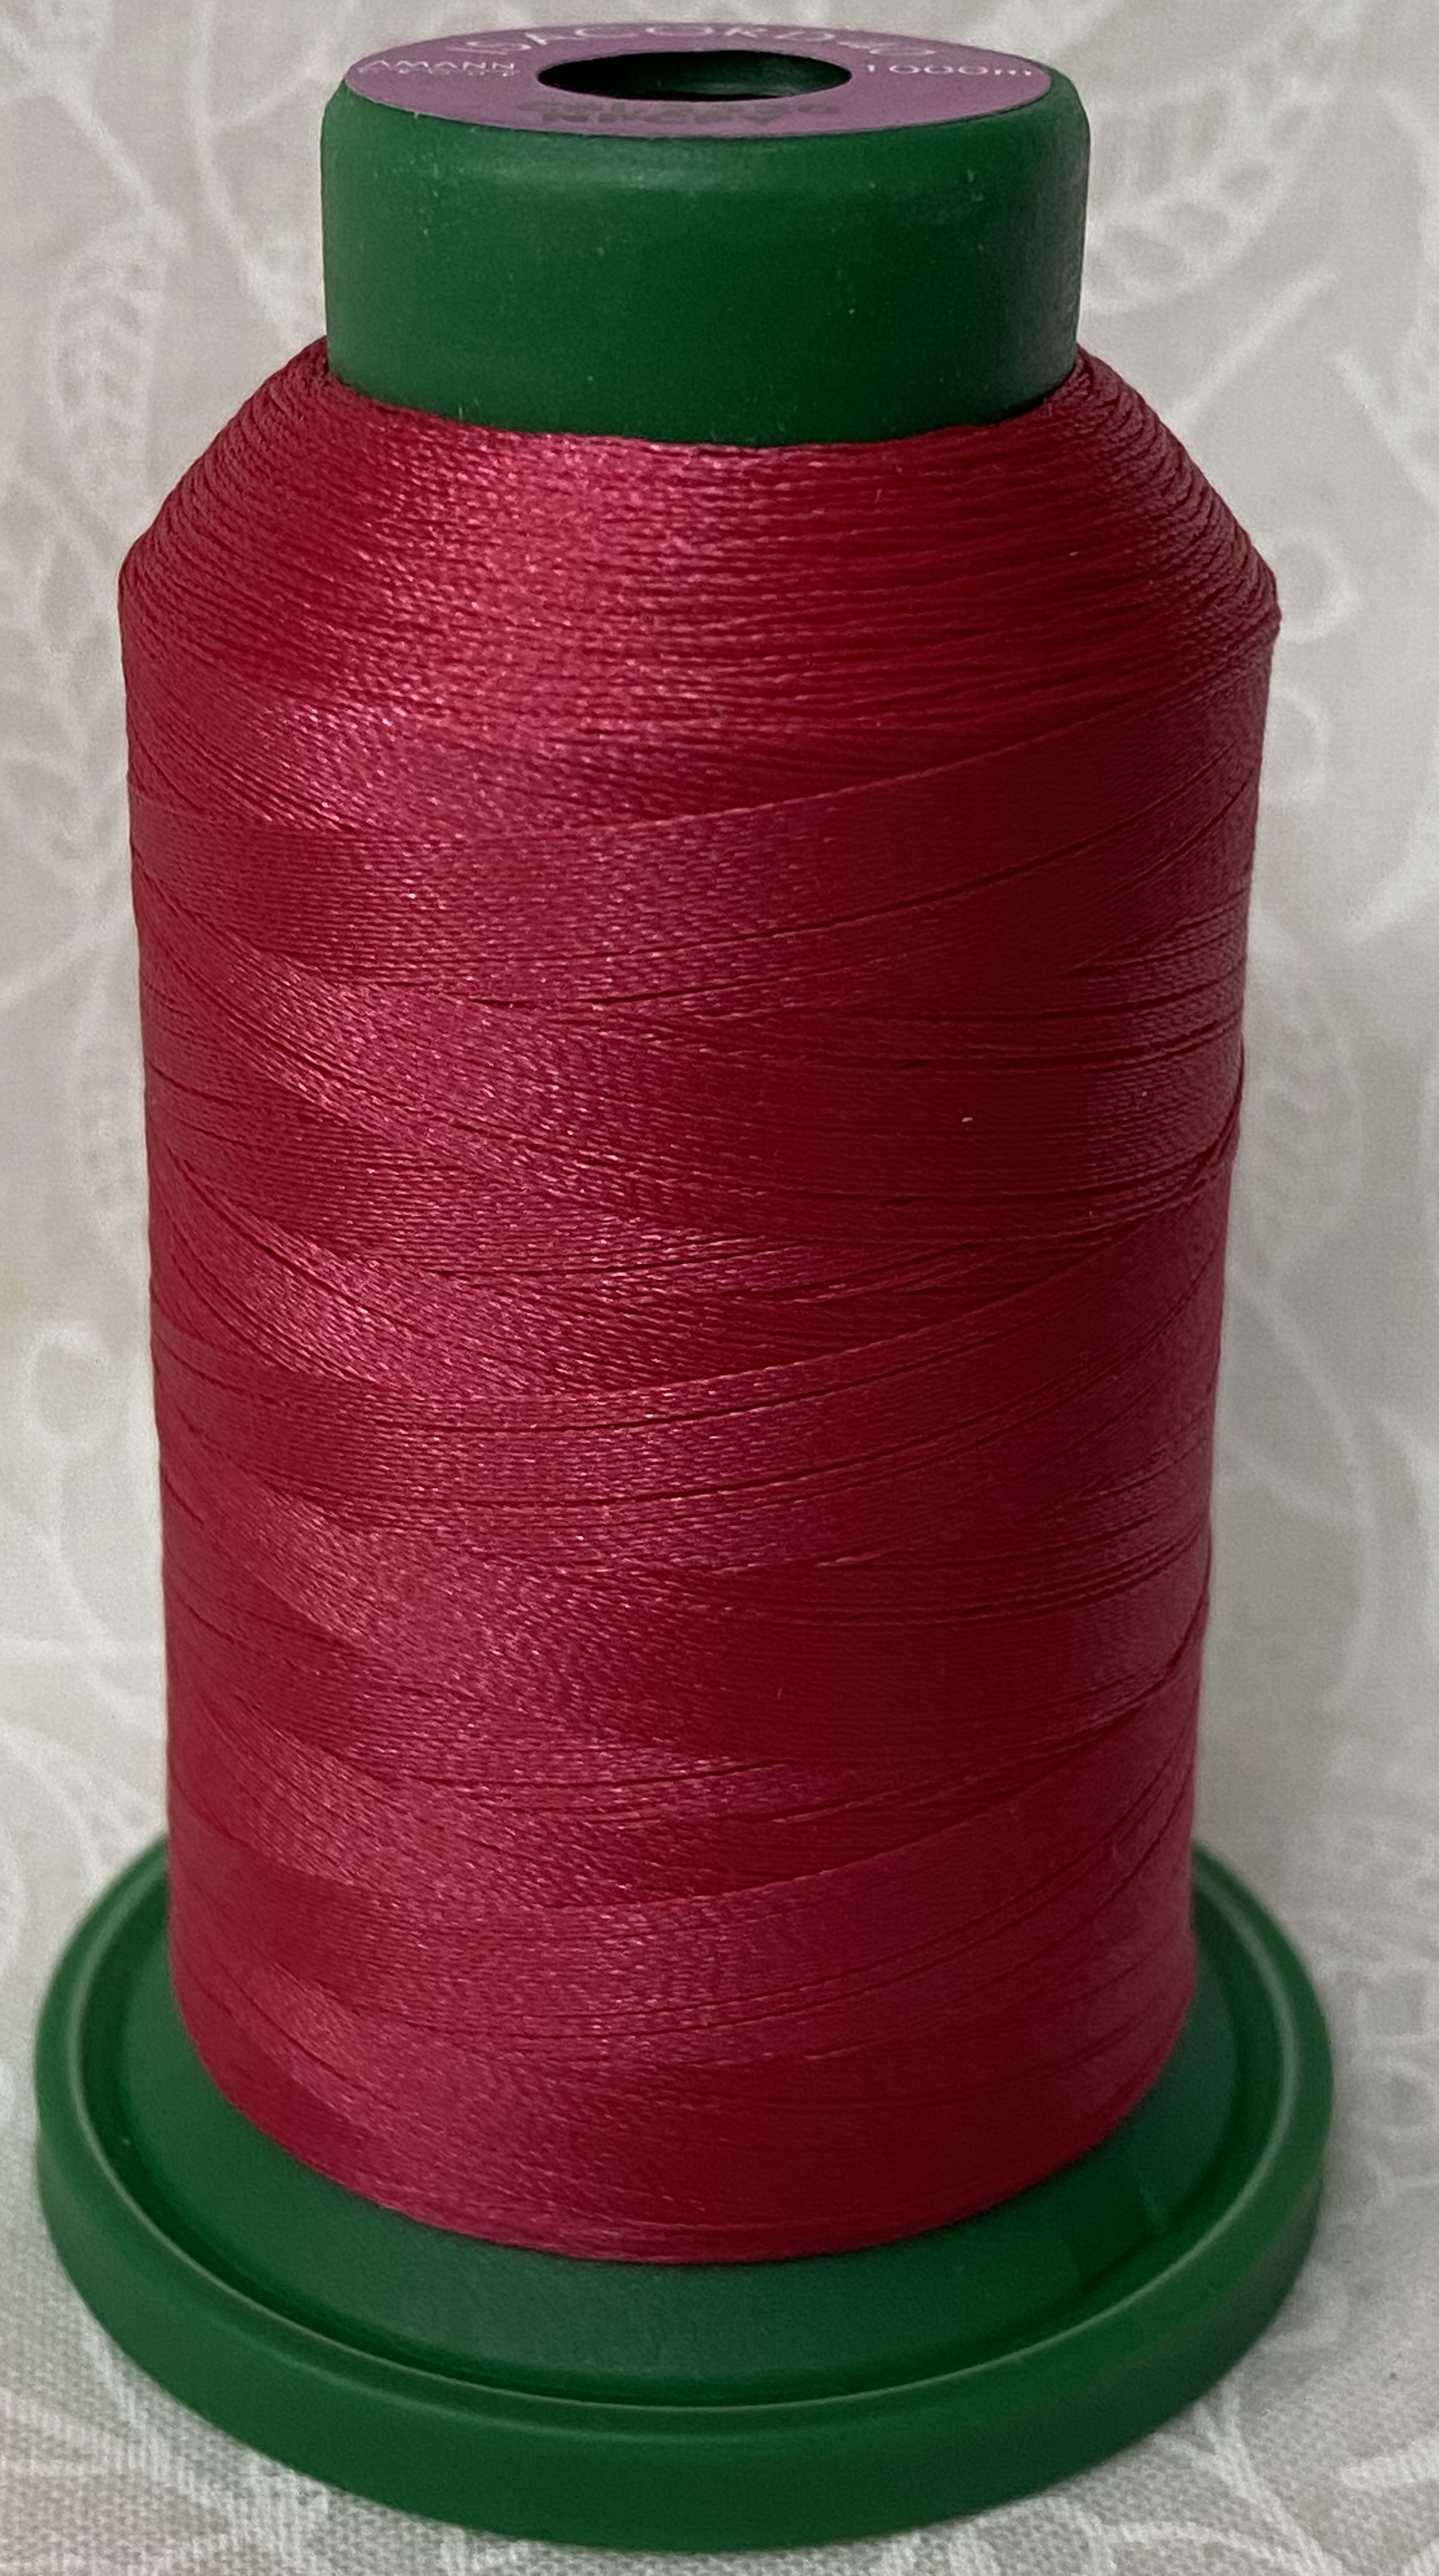 Isacord Embroidery Thread - Chocolate - mrsewing